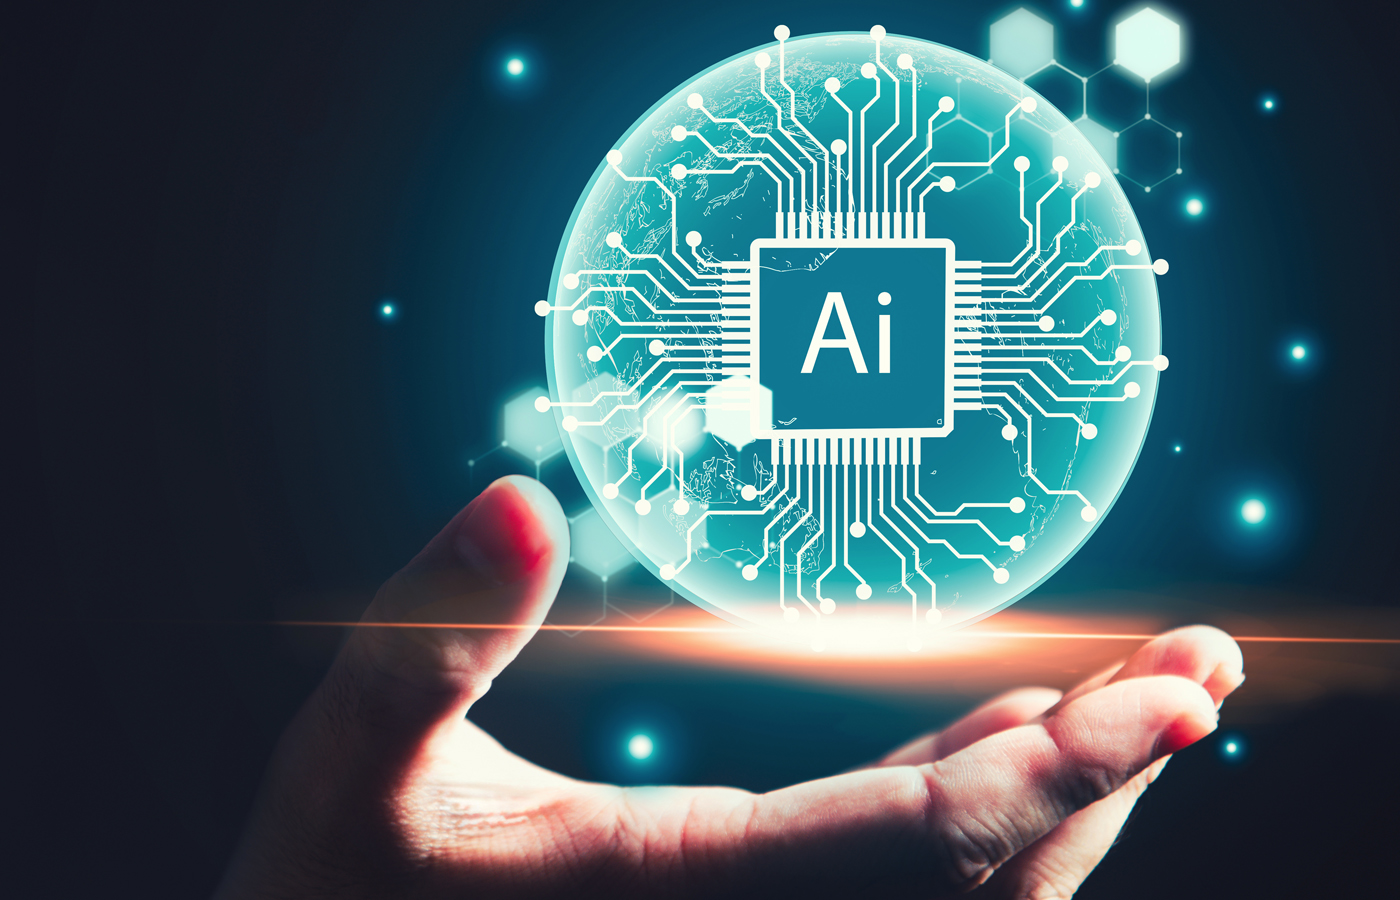 Global AI Alliance Aims to Accelerate Responsible and Transparent AI Innovation